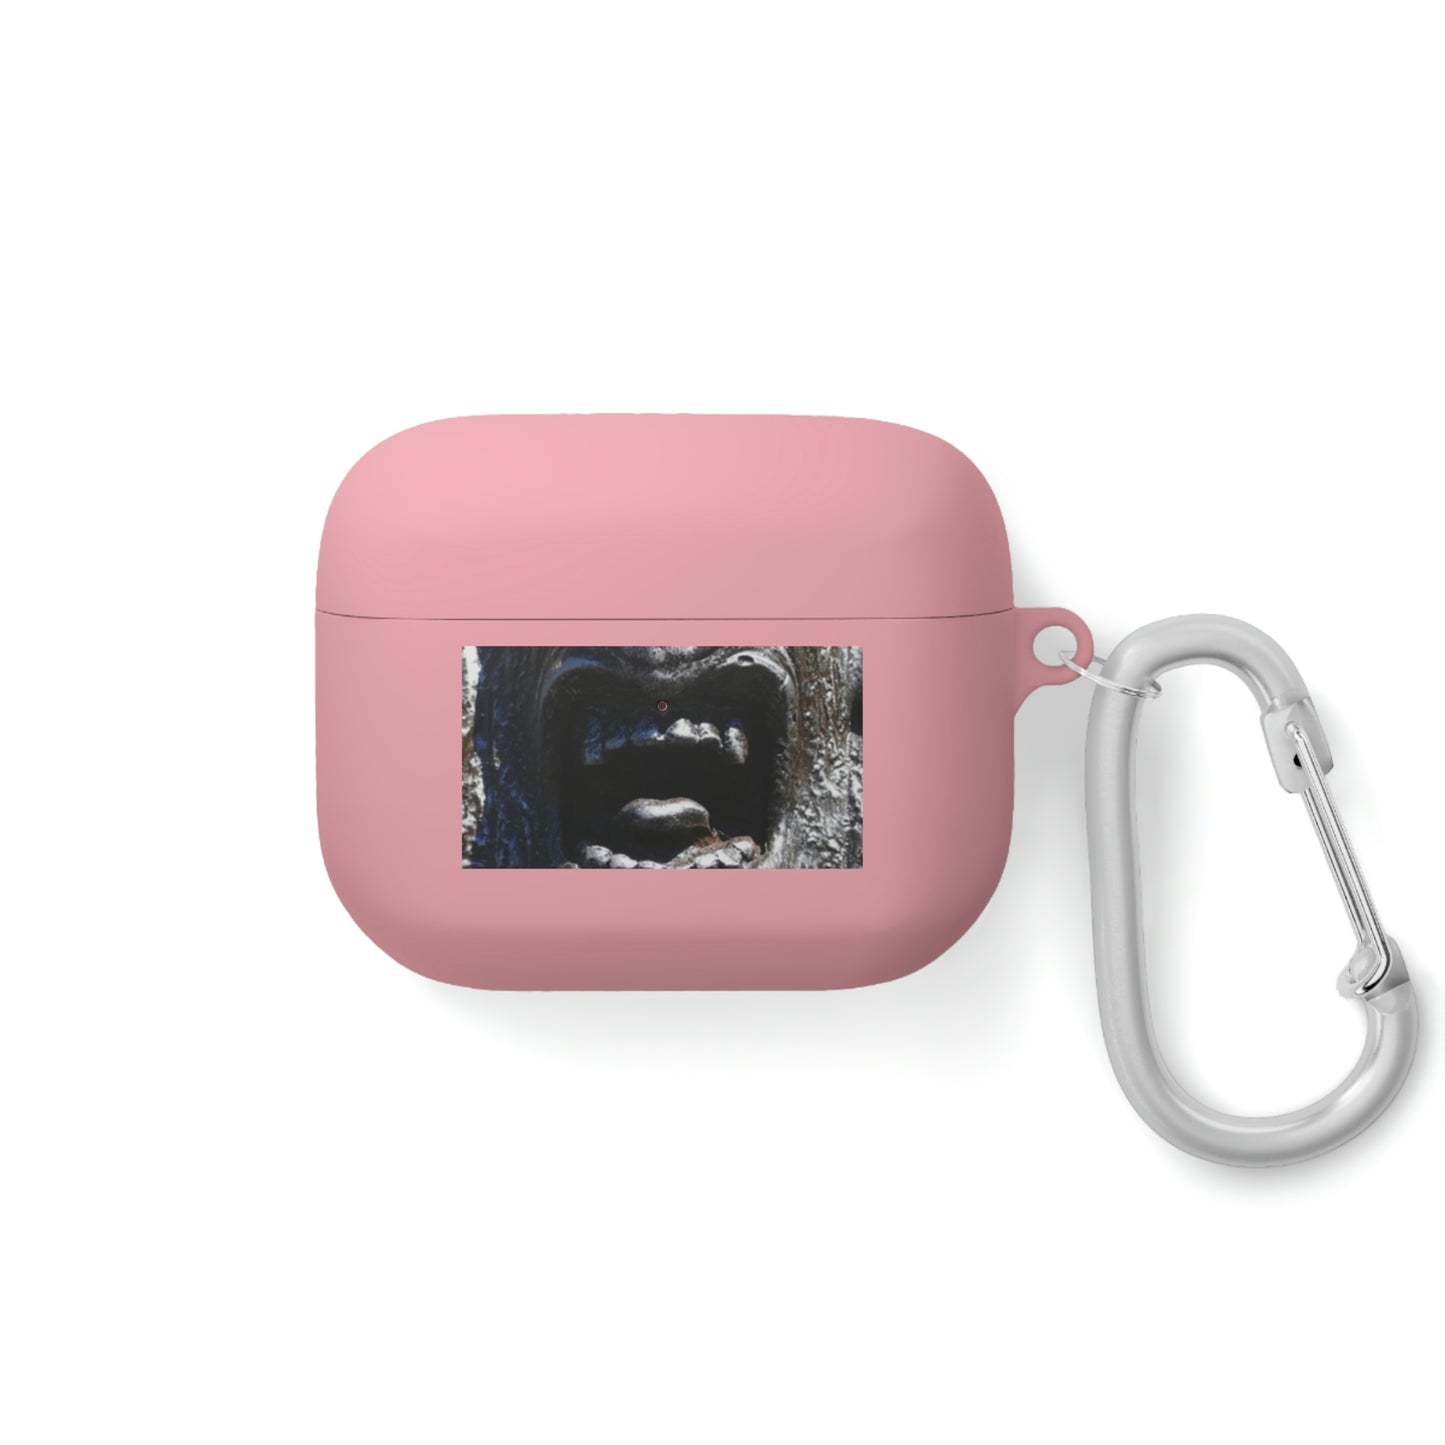 Frenzy Scream - AirPods and AirPods Pro Case Cover - Fry1Productions